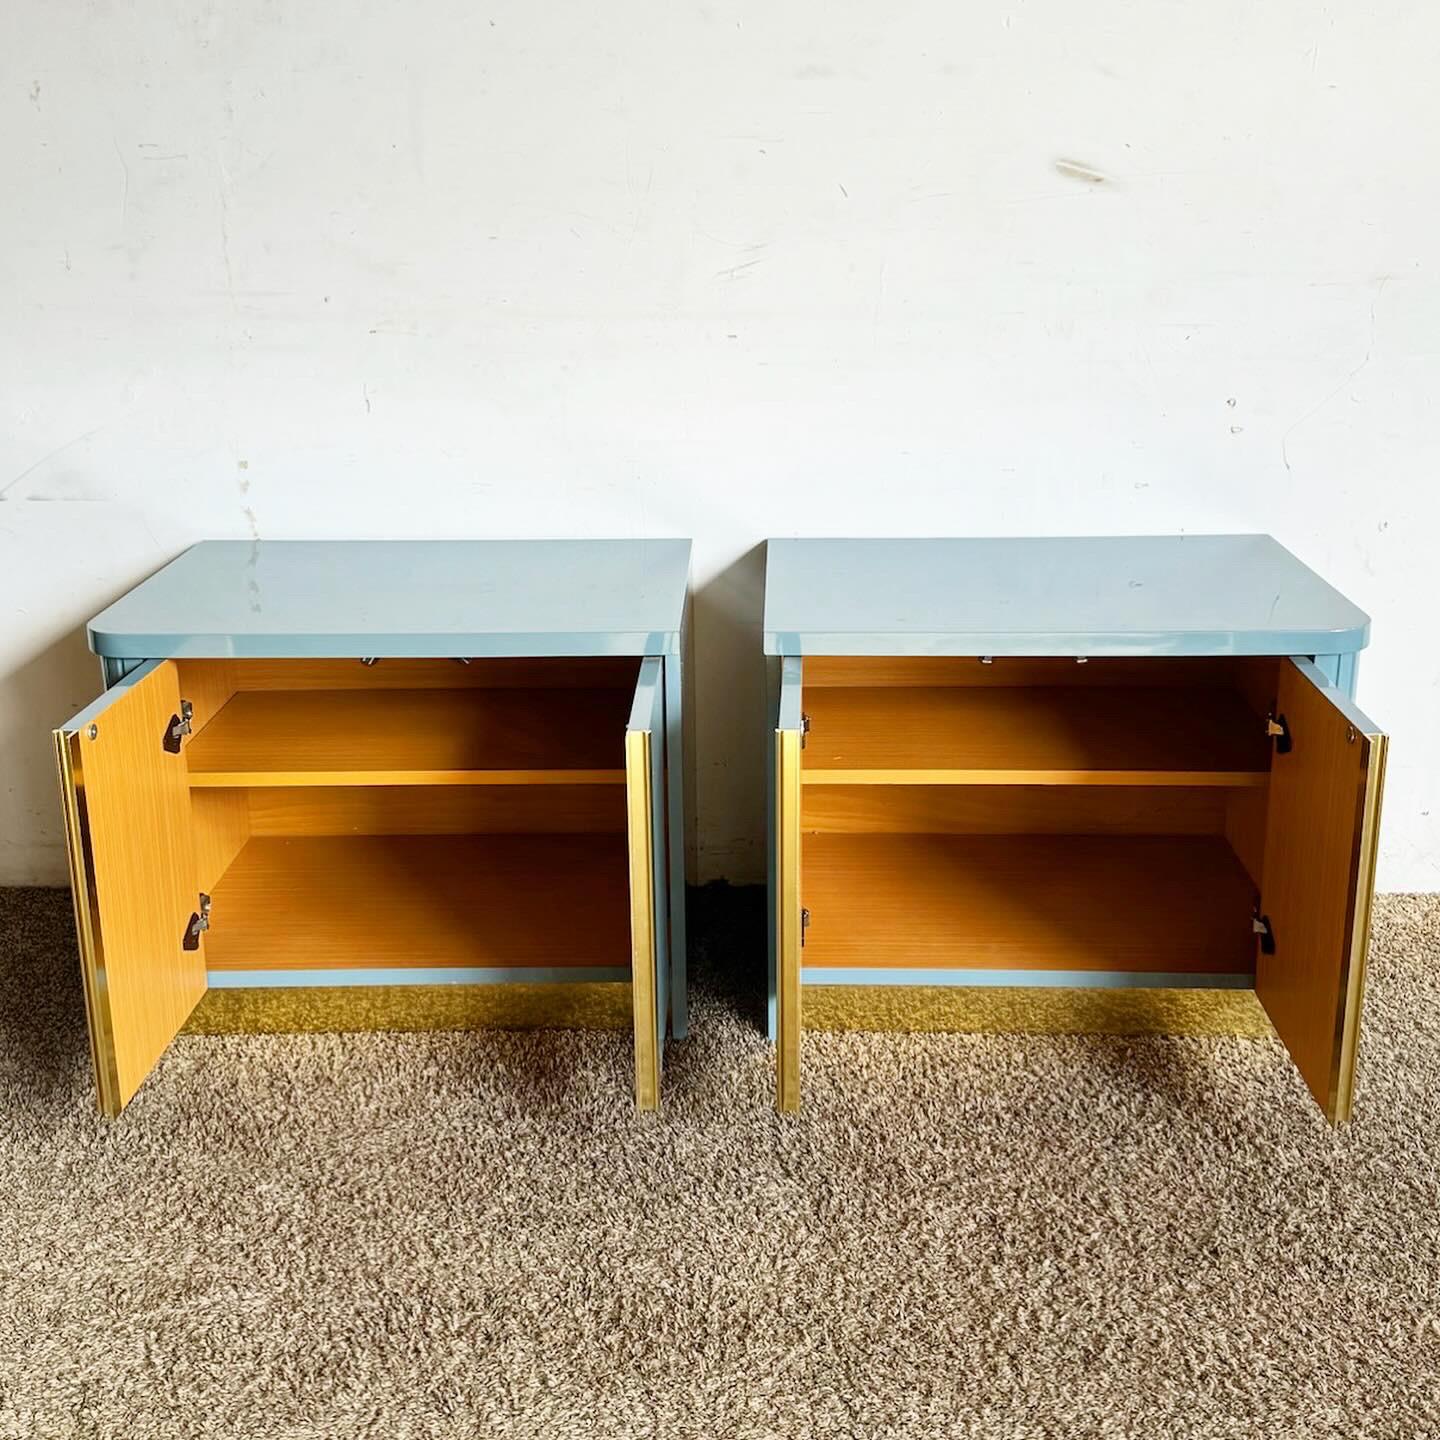 Italian Postmodern Baby Blue Lacquered Nightstands With Gold Accents – a Pair For Sale 4